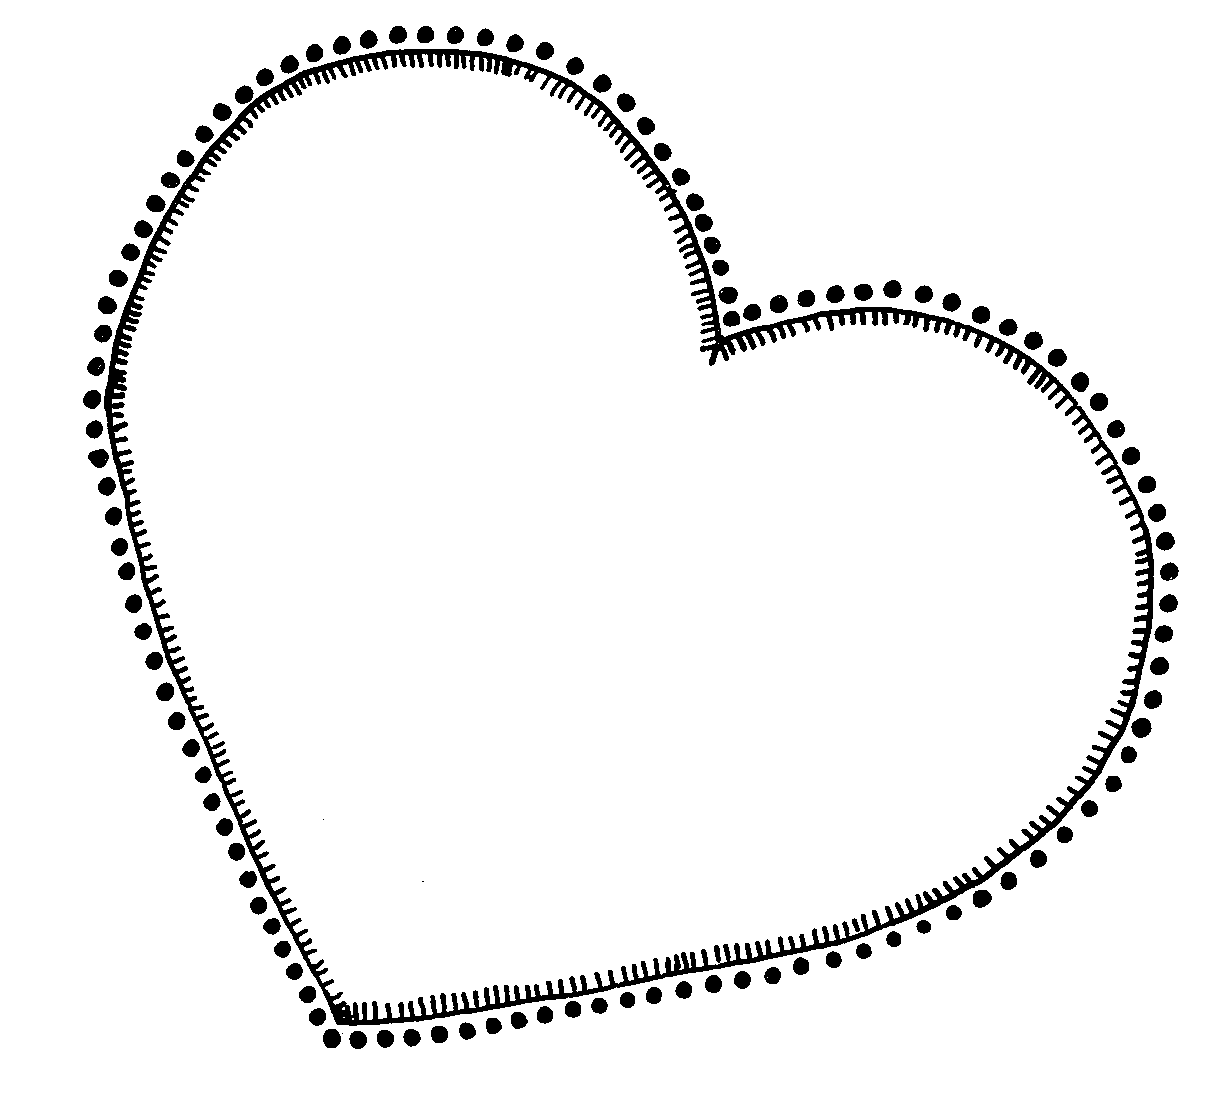 Heart Clipart Black And White - transparent clipart background - wedding heart clipart, sacred heart of jesus clip art, hearts black and white clip art, heart with wings clipart, heart stethoscope clipart, heart organ clip art, heart on fire clipart, heart border clipart black and white, heart black and white clipart, happy valentine's day clipart free, free clip art hearts and flowers, free clip art heart shape, ekg line clipart, double heart clip art, dog heart clipart, cute heart clipart, cute heart clip art, clip art broken heart, broken heart clipart, black and white heart clipart